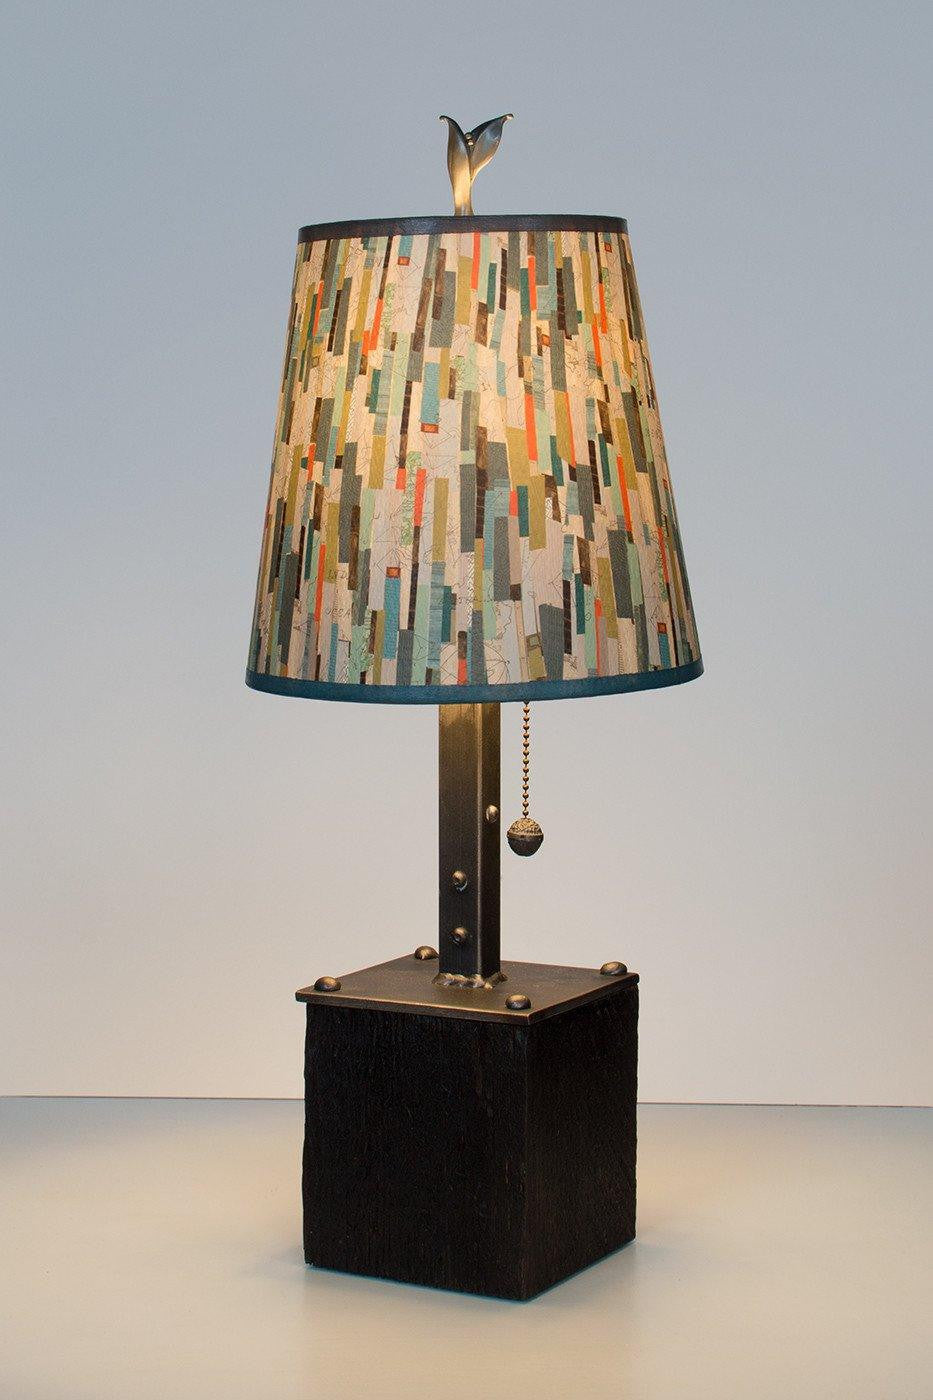 Janna Ugone &amp; Co Table Lamps Steel Table Lamp on Reclaimed Wood with Small Drum Shade in Papers